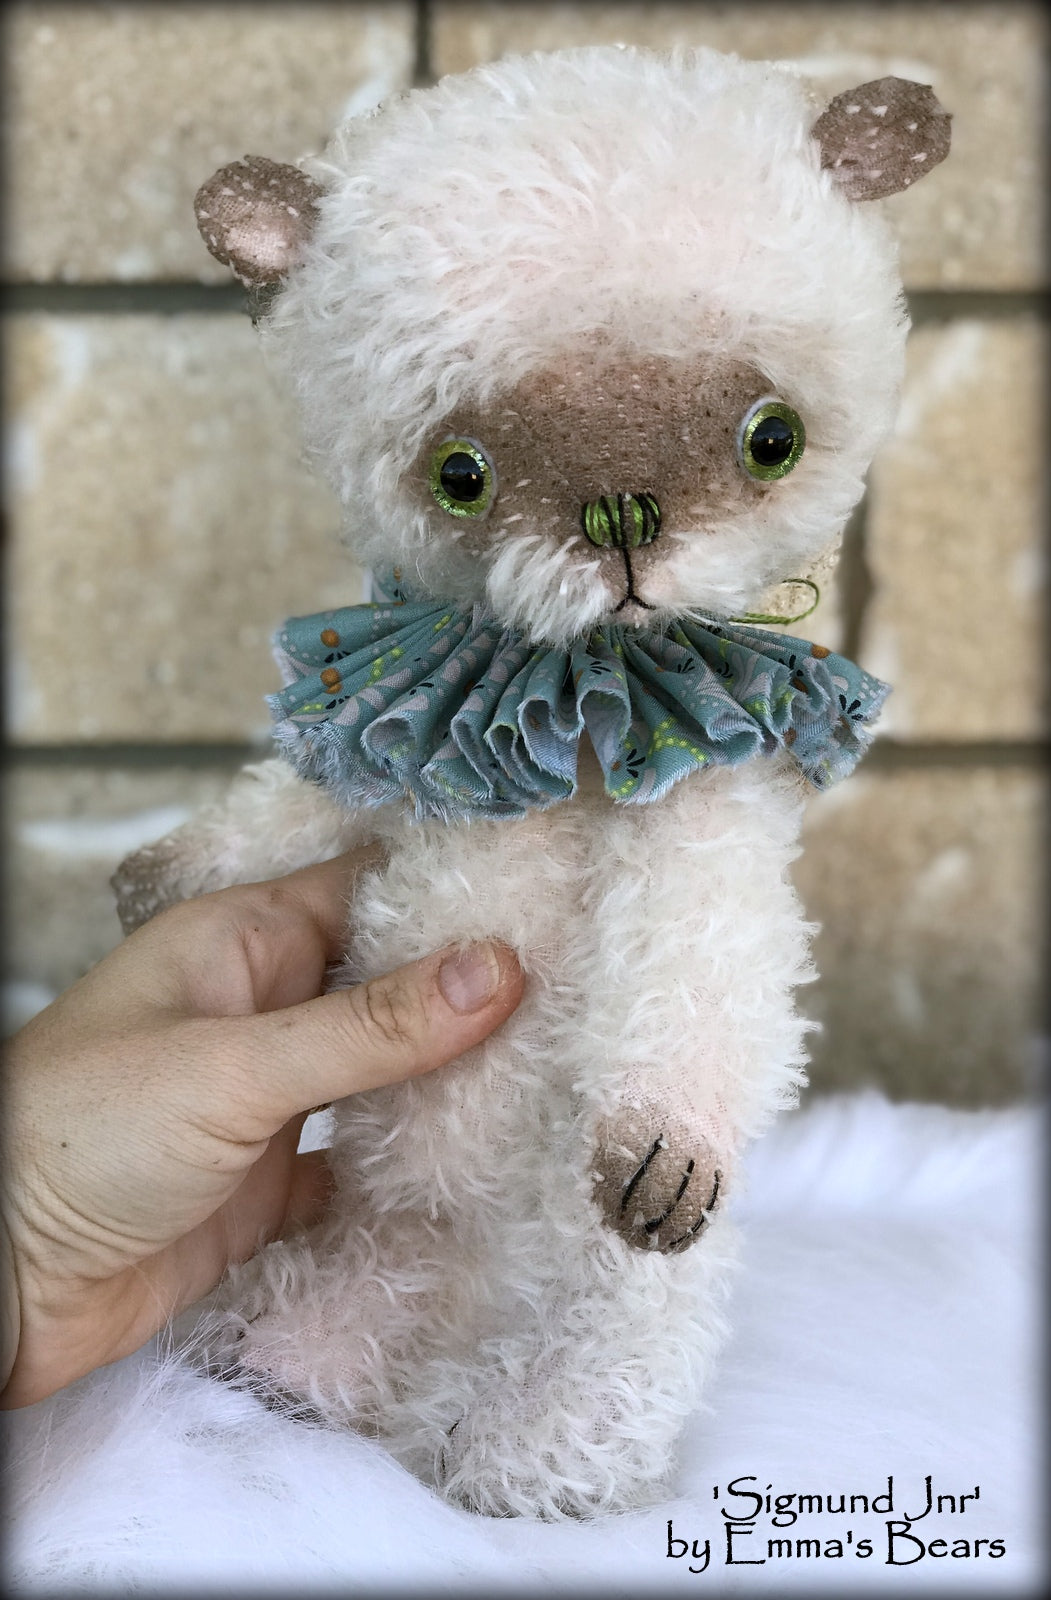 Sigmund Jnr - 11" hand-dyed double thick mohair Artist Bear by Emma's Bears - Limited Edition